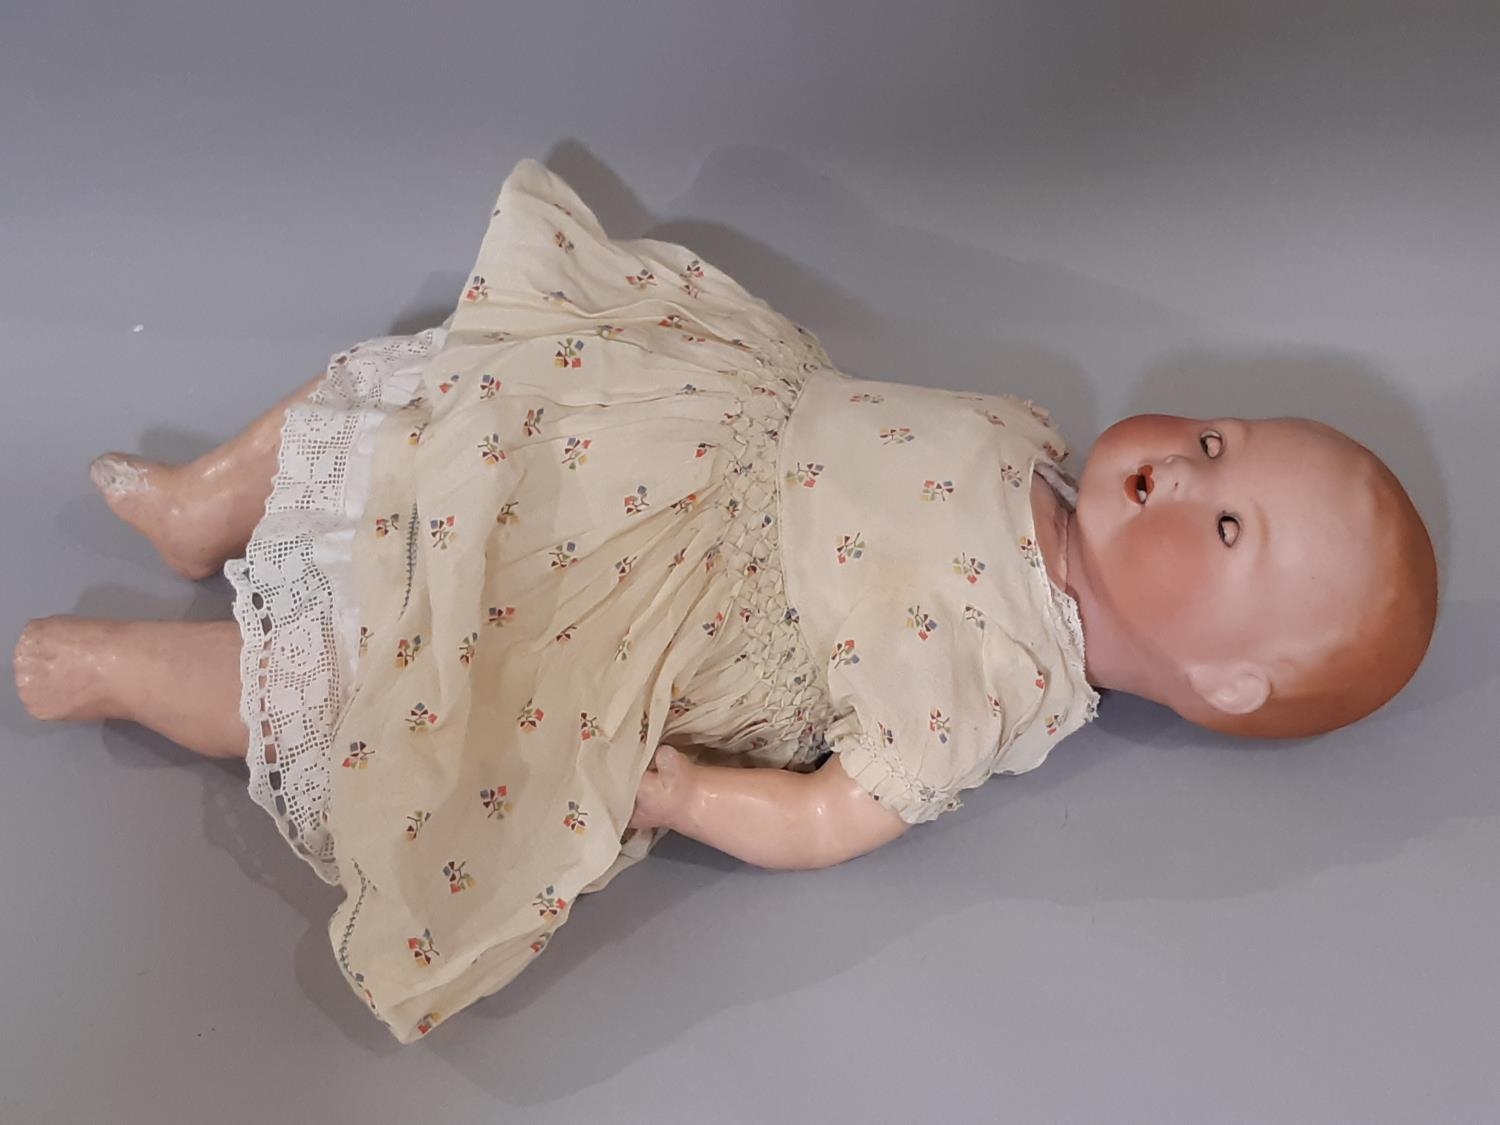 1920's 'My Dream Baby' bisque head doll by Armand Marseille, mould 351, with bent limb composition - Image 4 of 5